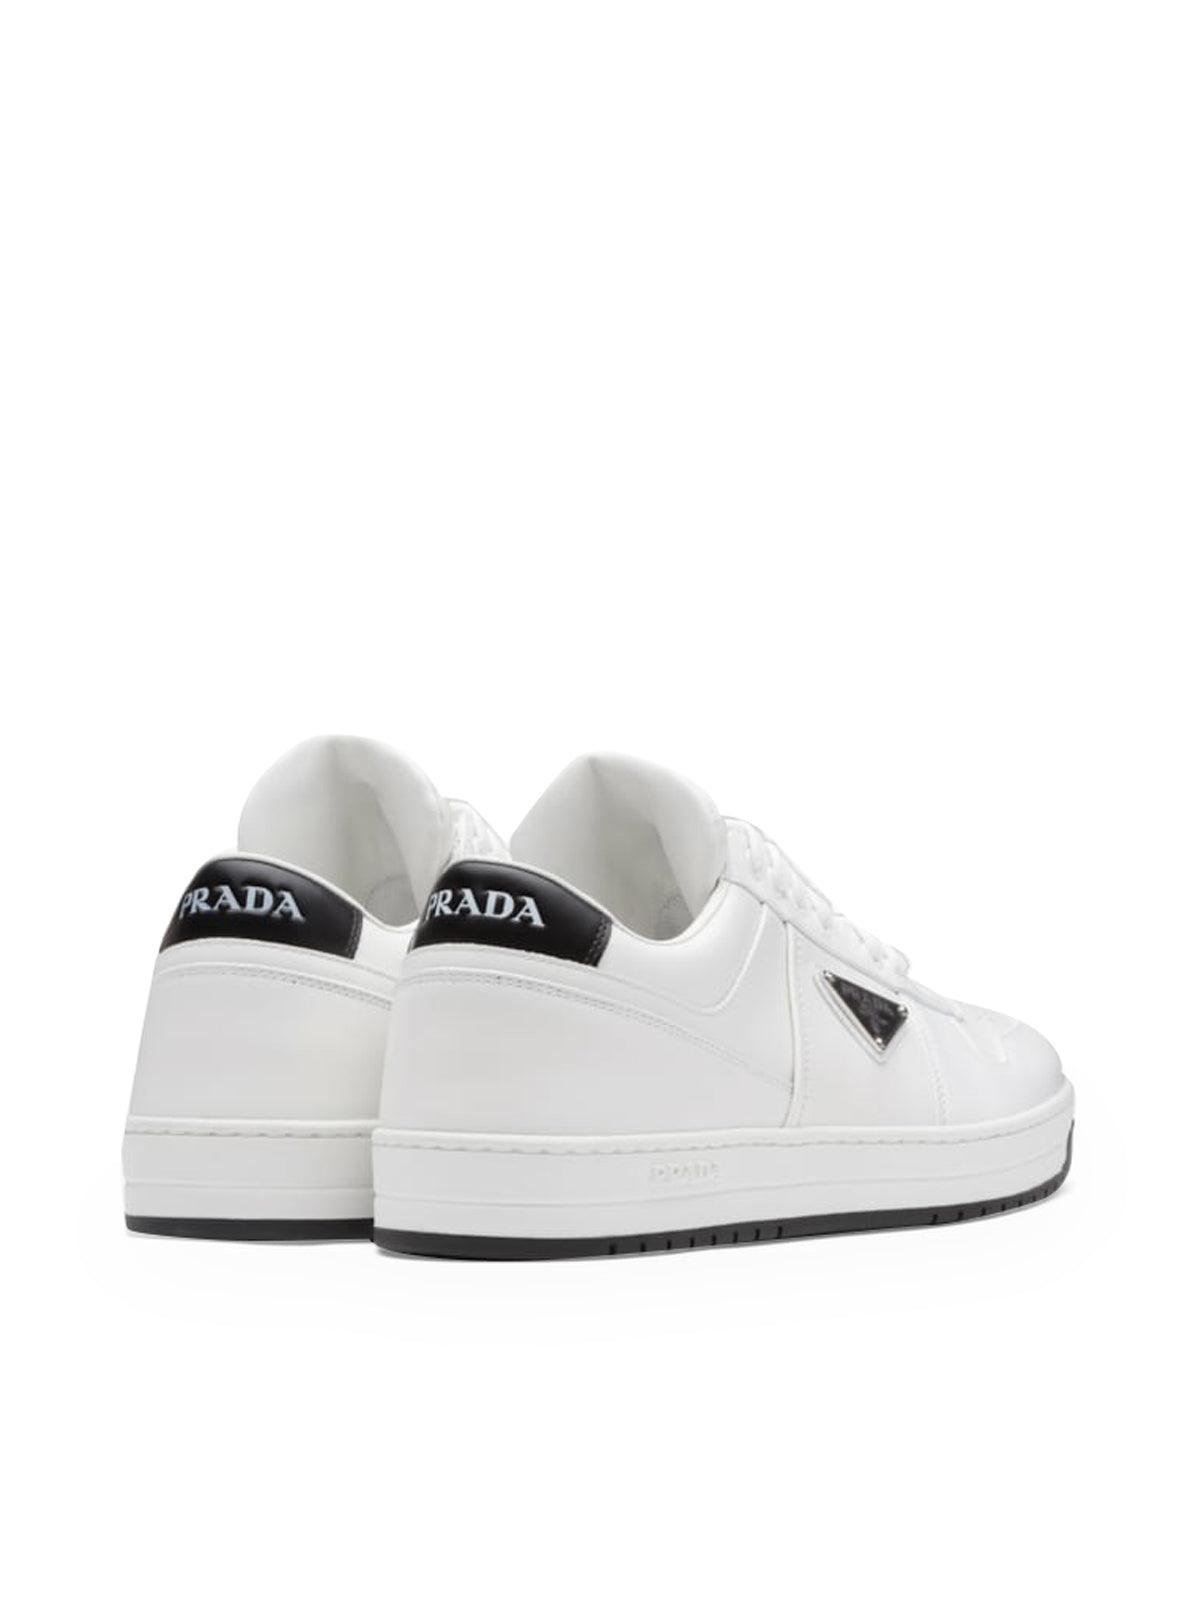 Prada Downtown Sneakers In Leather in White for Men - Save 7% | Lyst